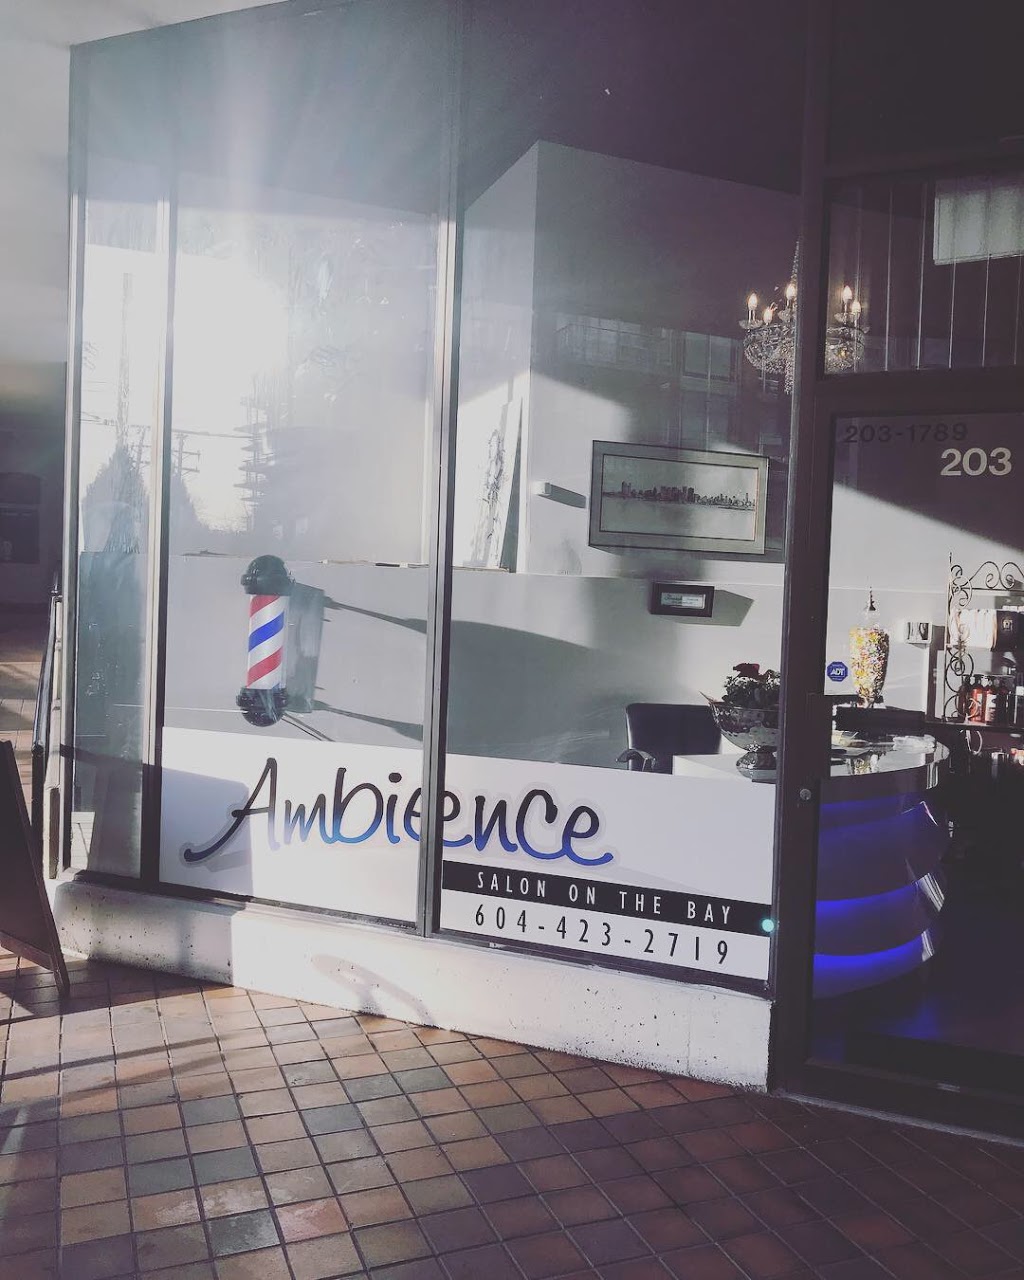 Ambience Hair Salon Vancouver | 1789 Davie St #203, Vancouver, BC V6G 1W5, Canada | Phone: (604) 423-2719